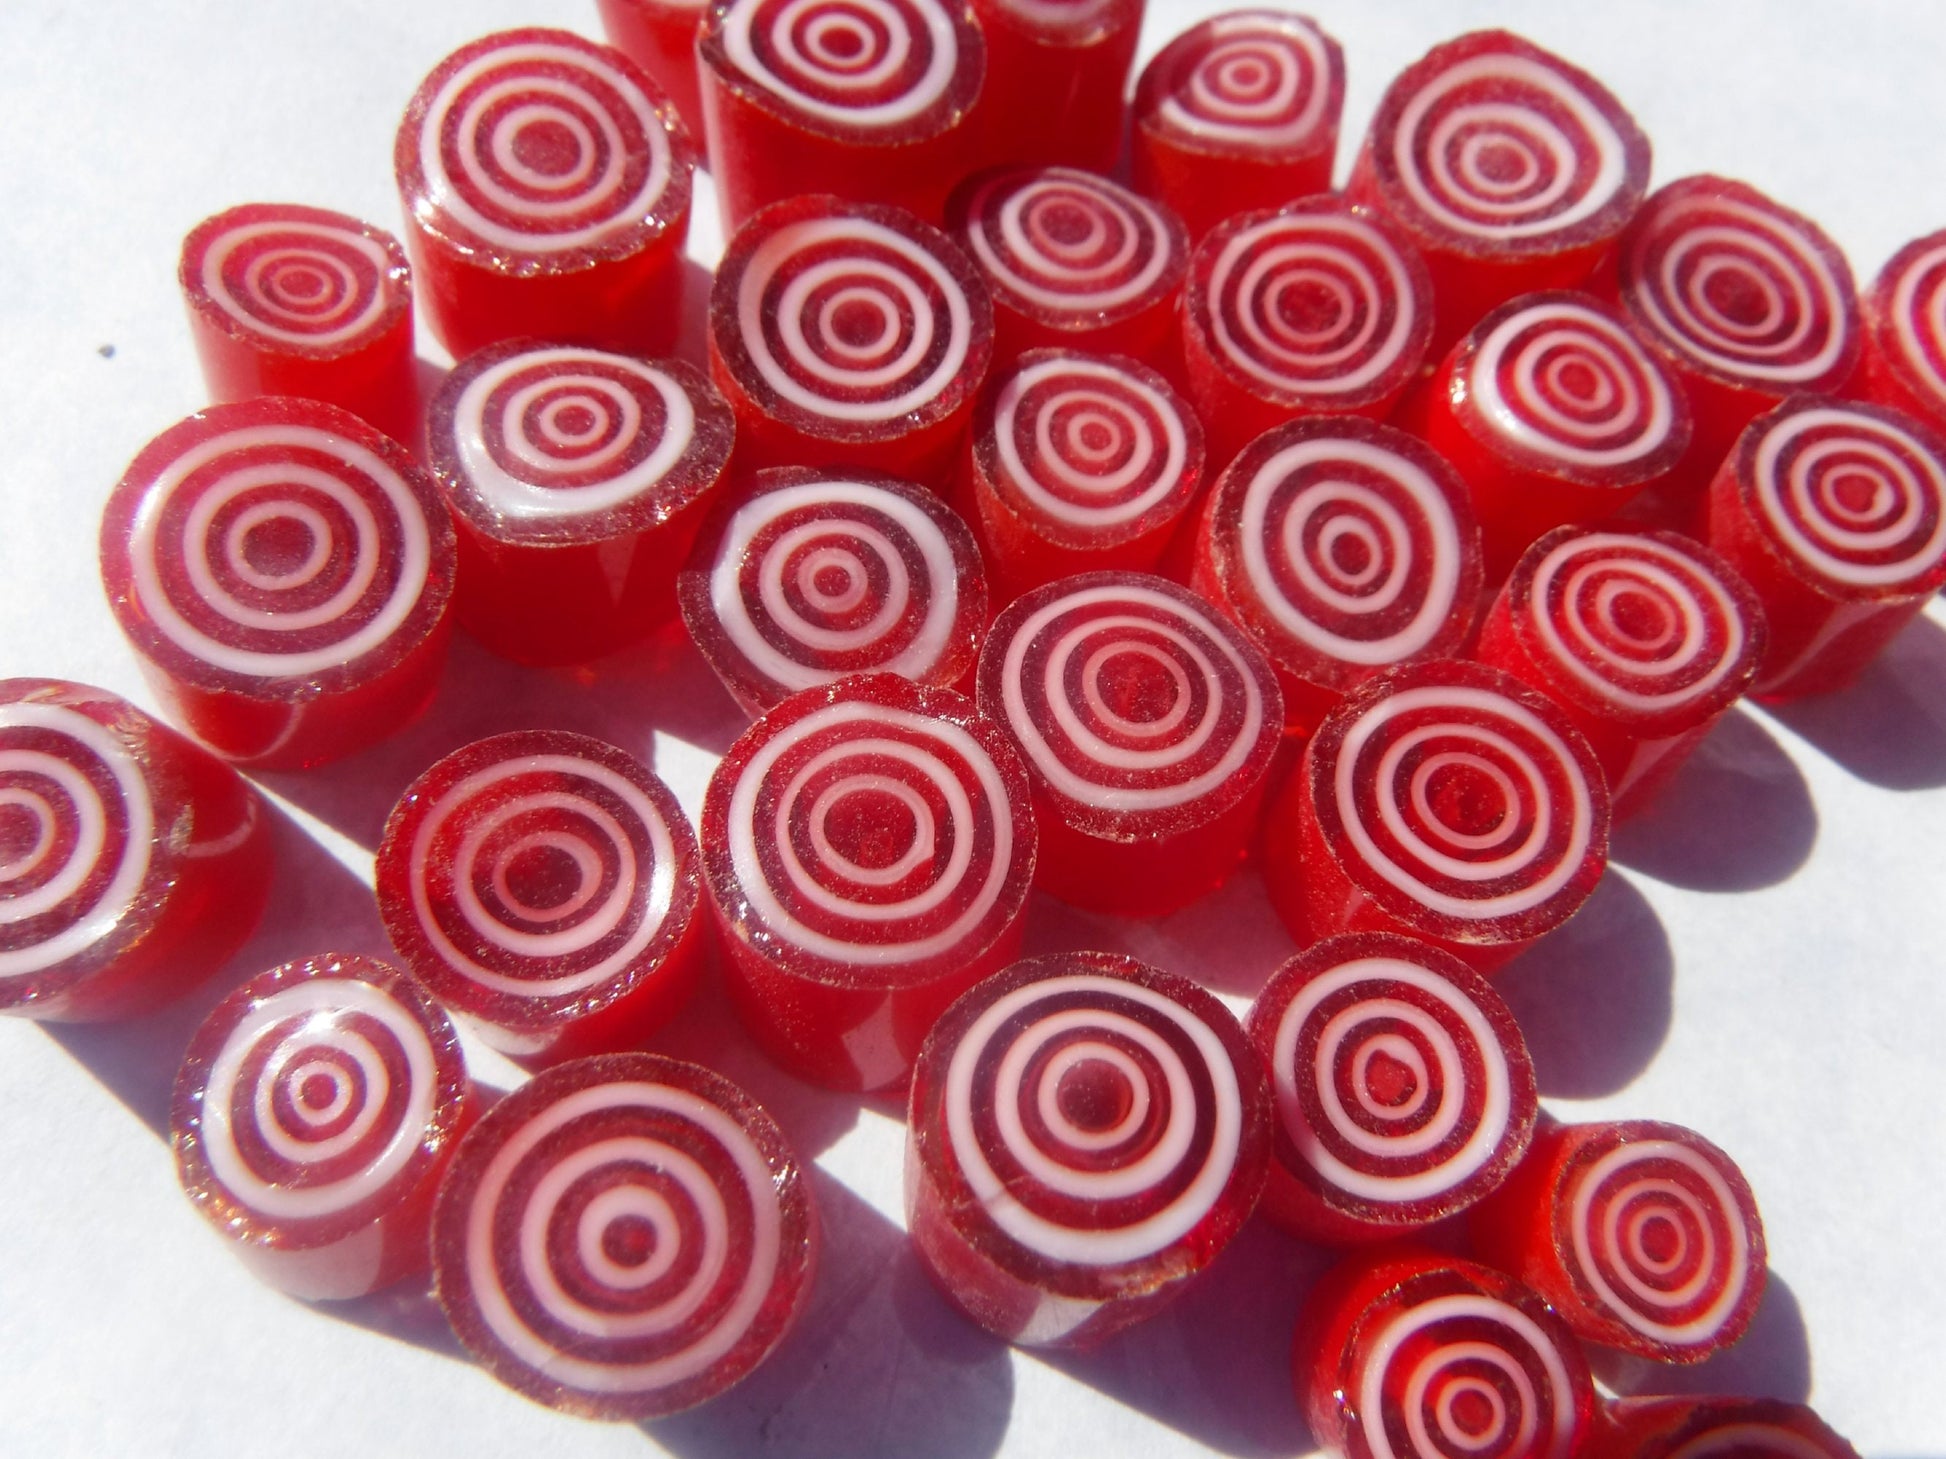 Red with White Circles Millefiori - 25 grams - Unique Mosaic Glass Tiles